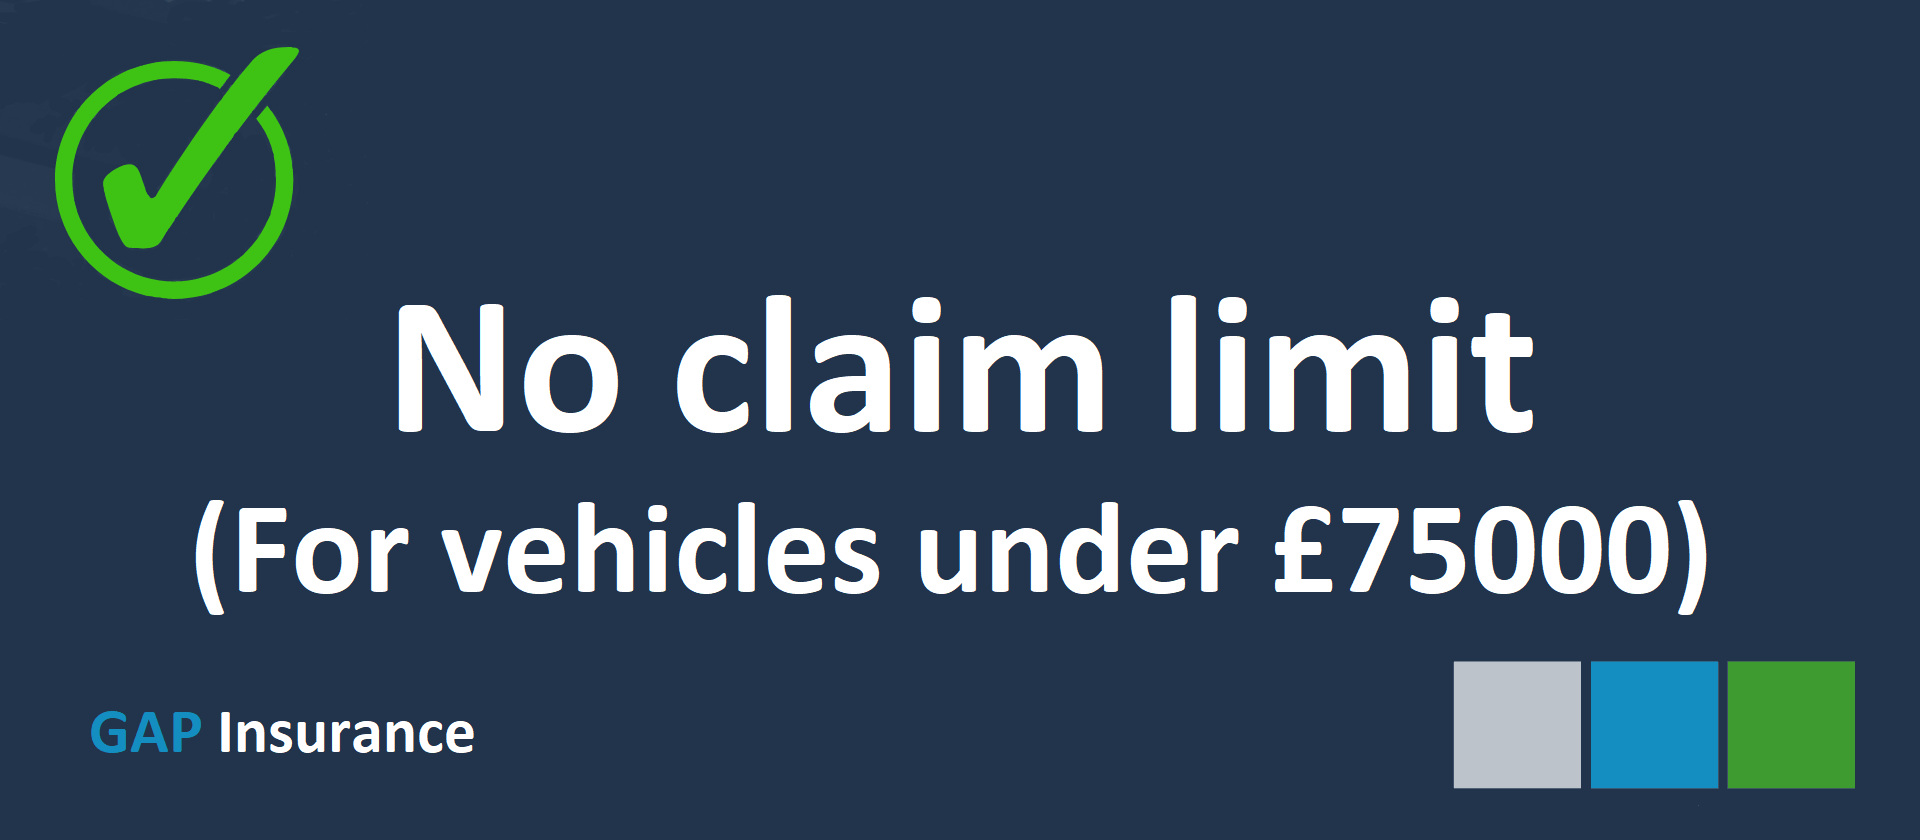 No Gap Insurance claim limit for vehicles up to £75000